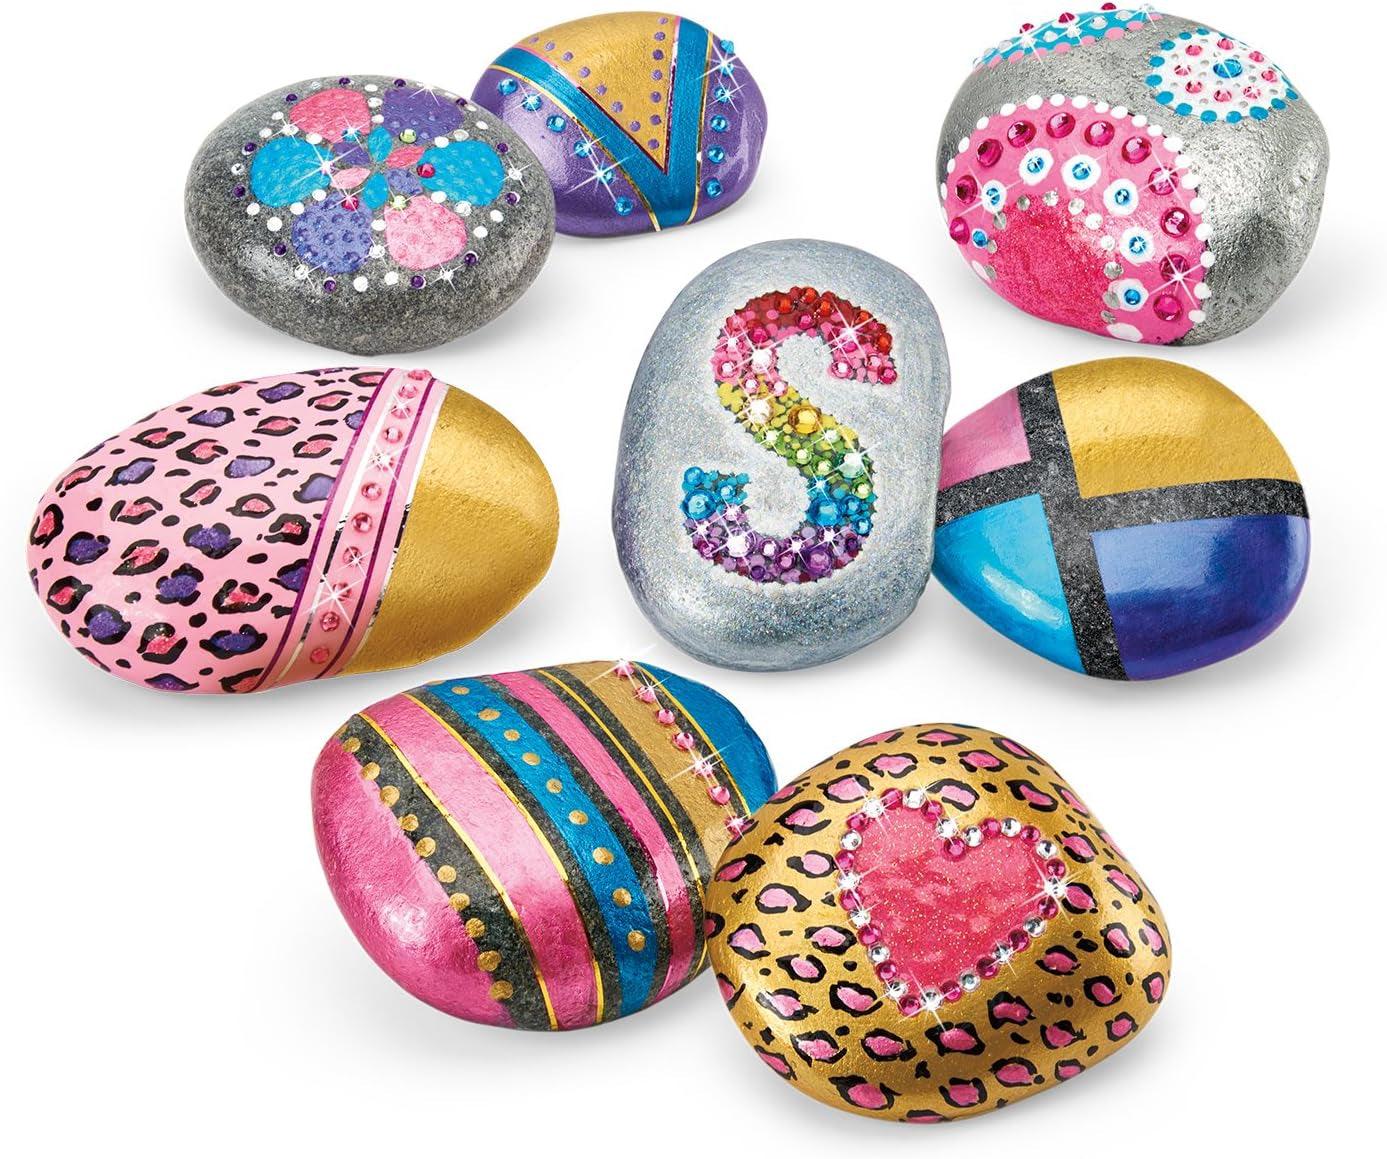 Shimmer ’N Sparkle Metallic Mania Rock Art DIY Kit for Ages 6 and Up - WoodArtSupply